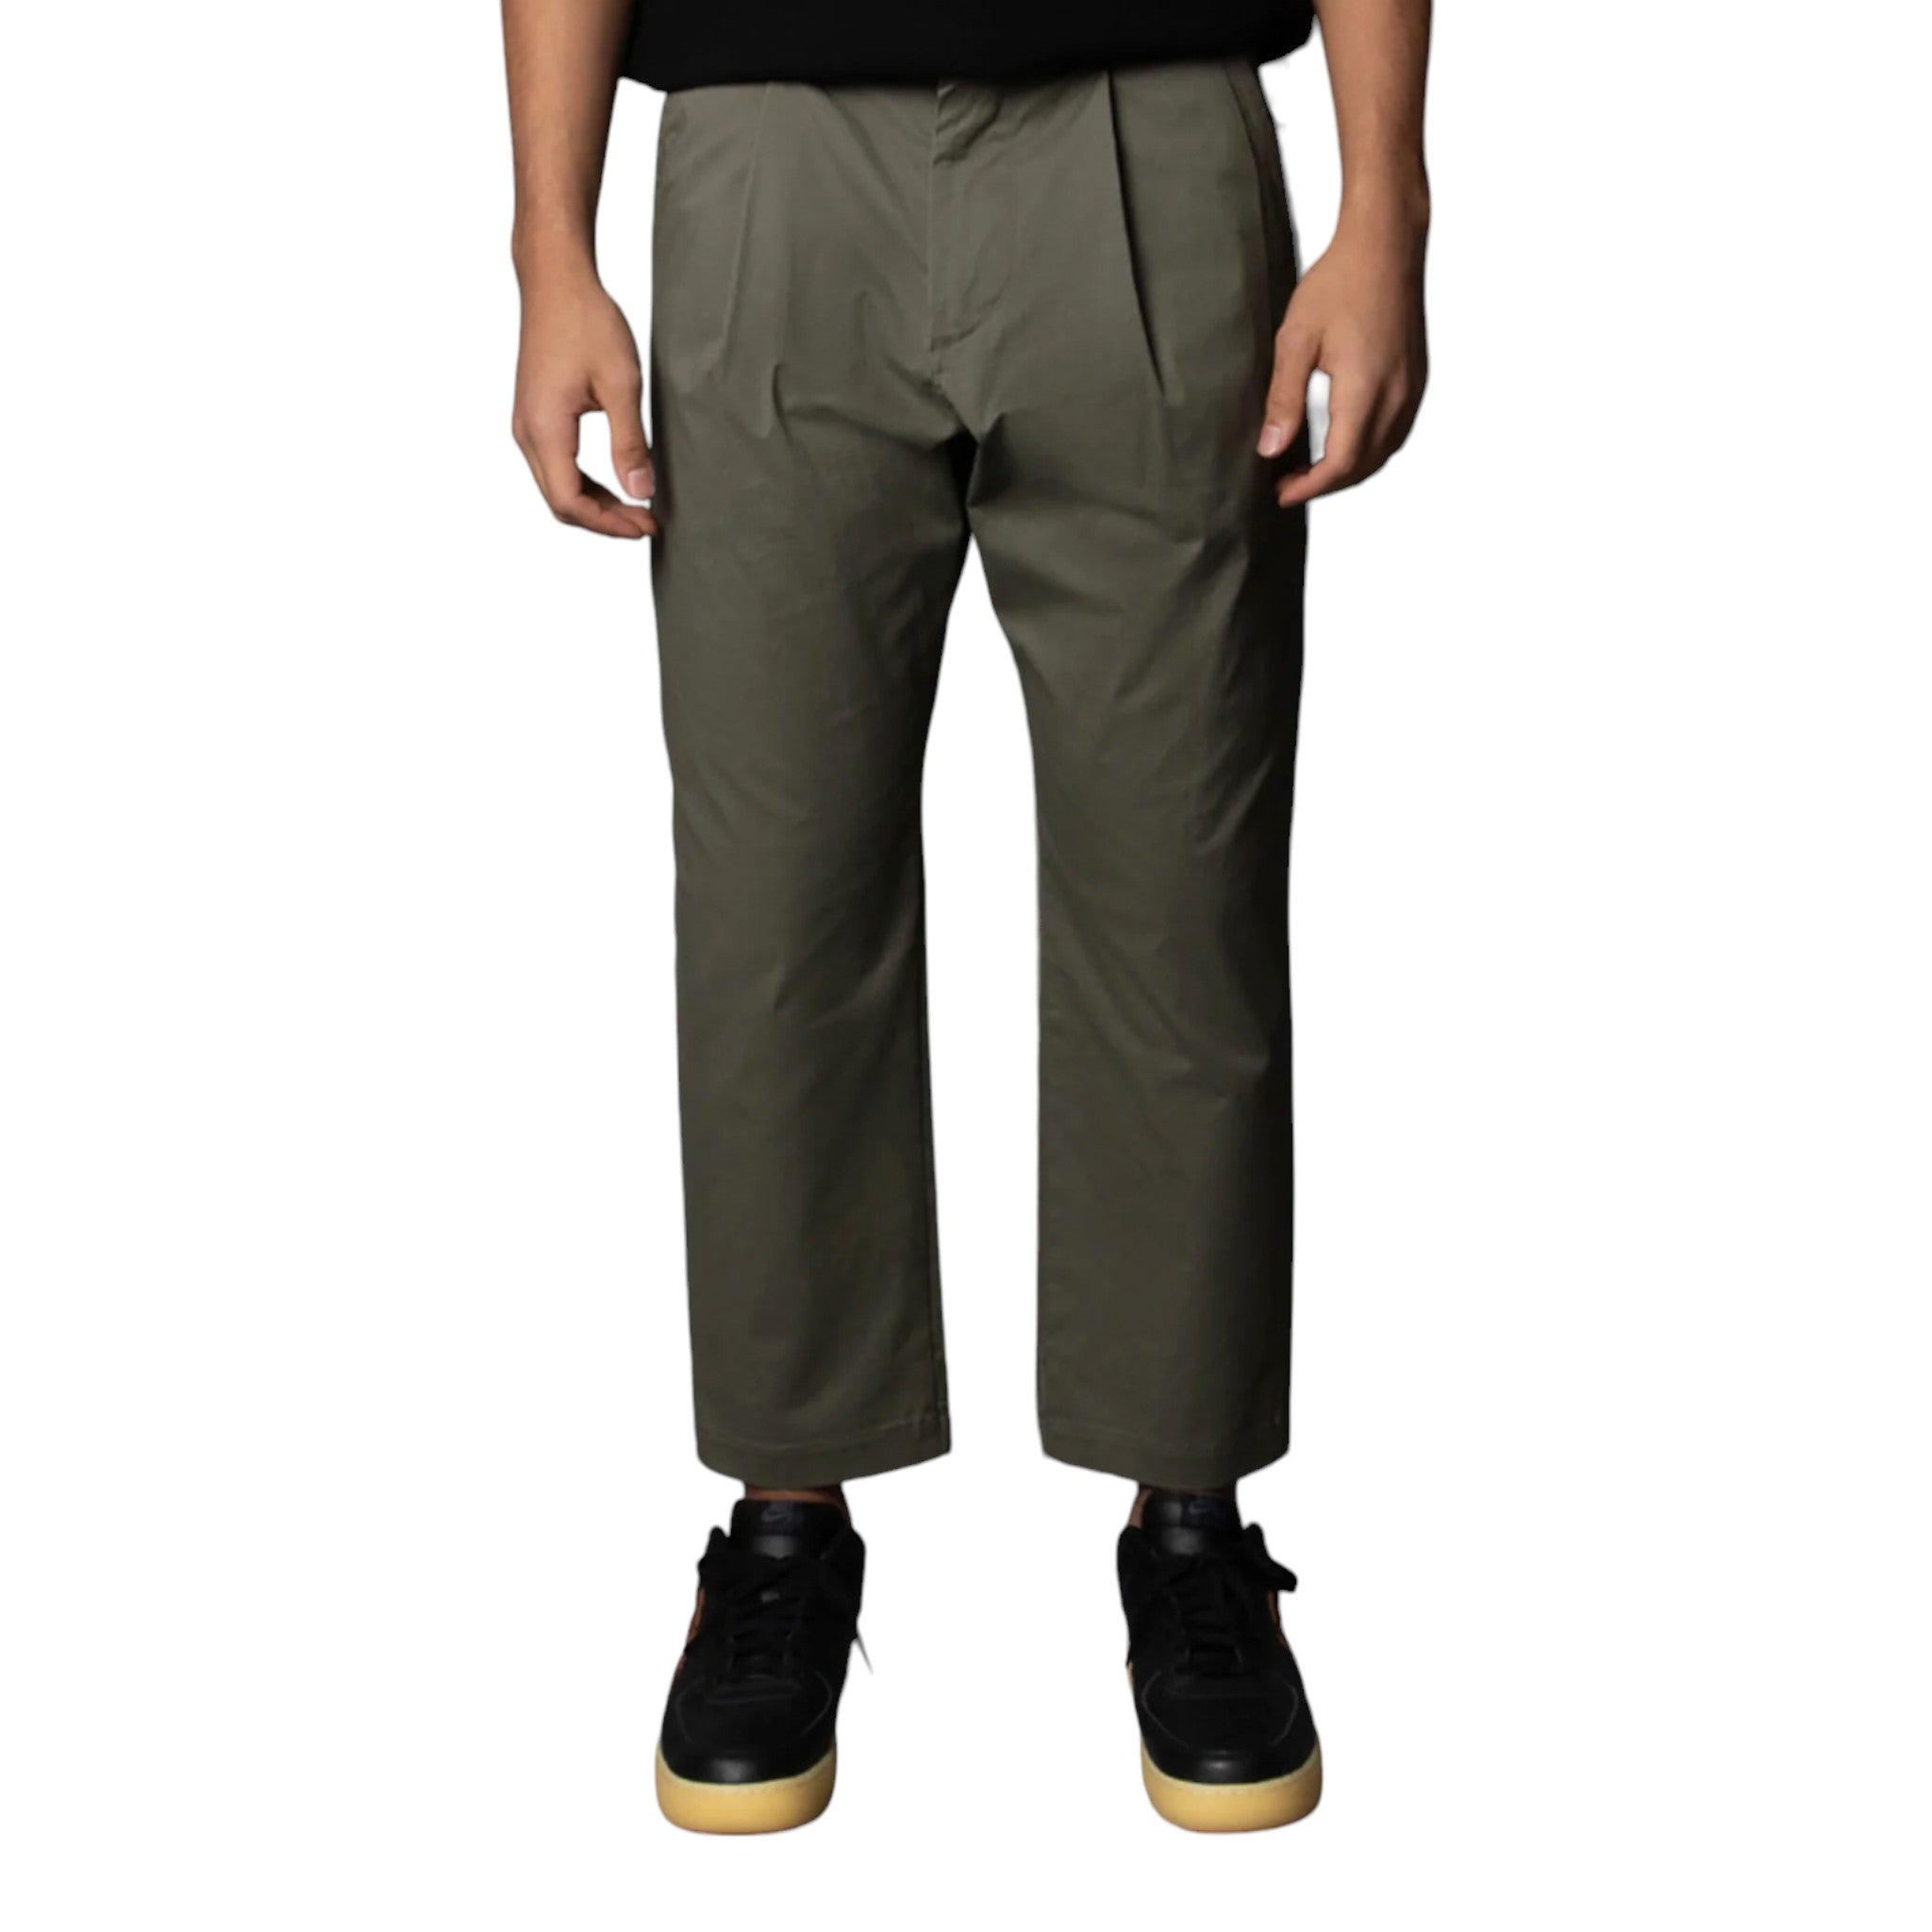 Olive cropped pants with button and zip closure